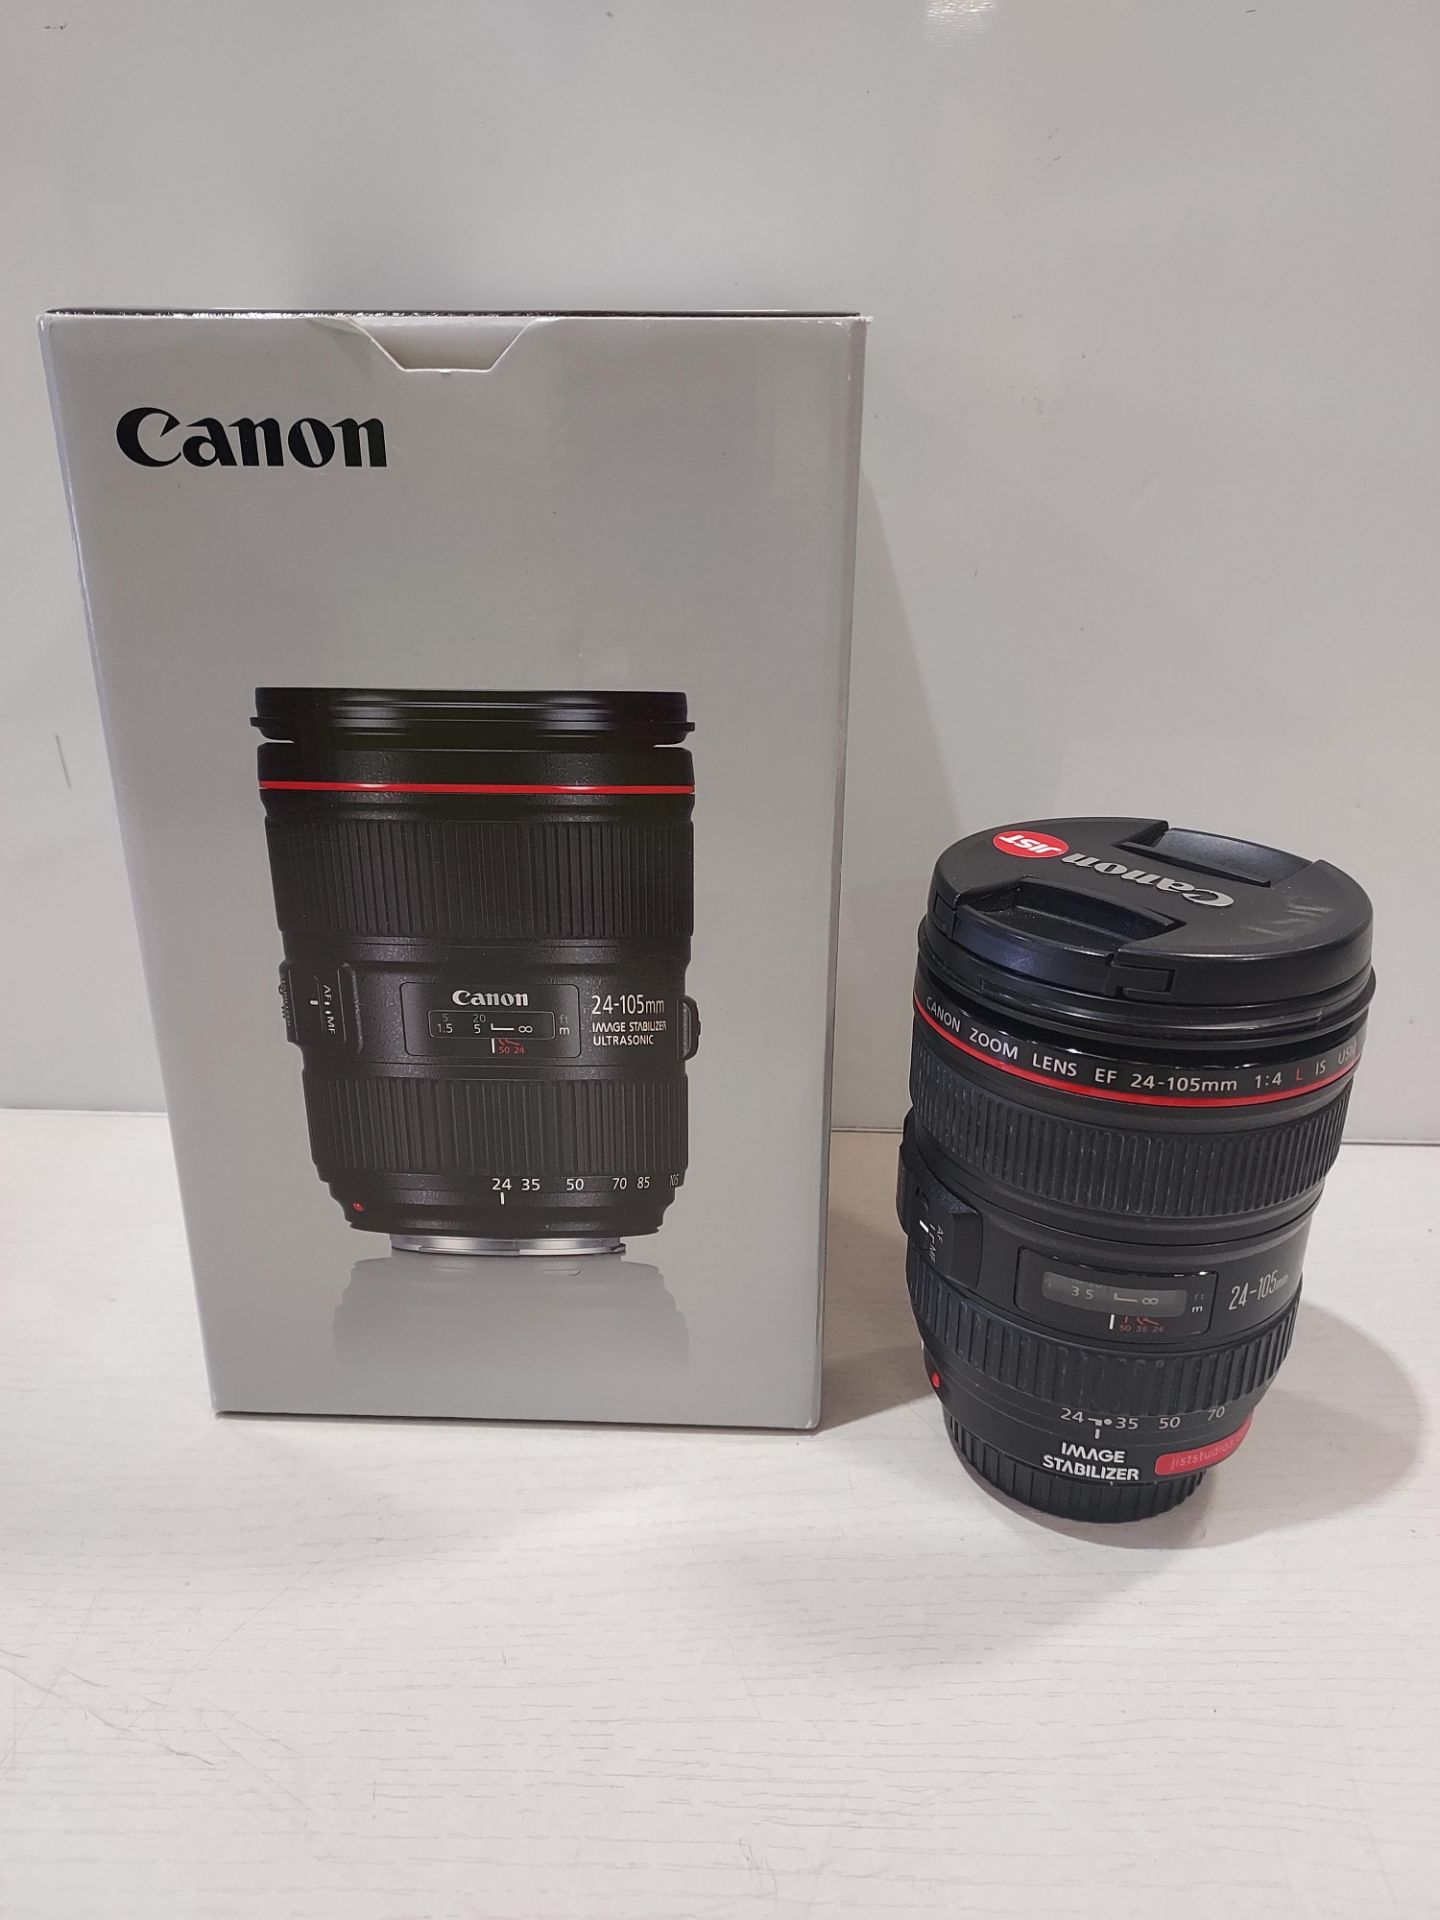 CANON 24-105 MM F/4L IS USM CAMERA LENS WITH ORIGINAL BOX - Image 2 of 2